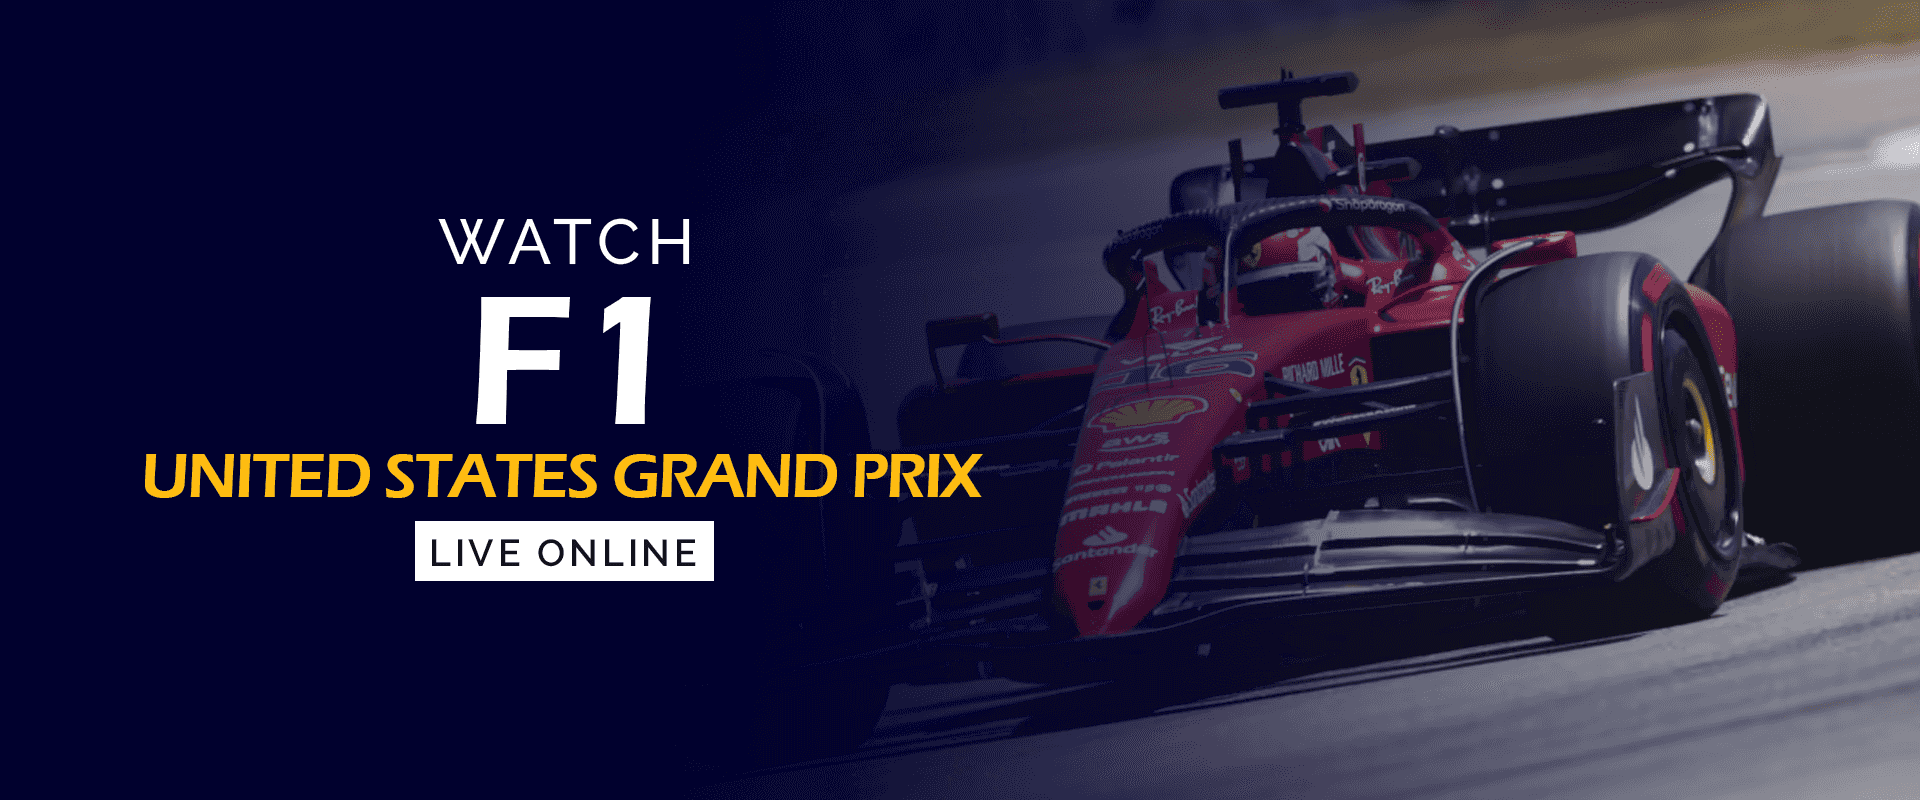 How to Watch F1 United States Grand Prix Live Online